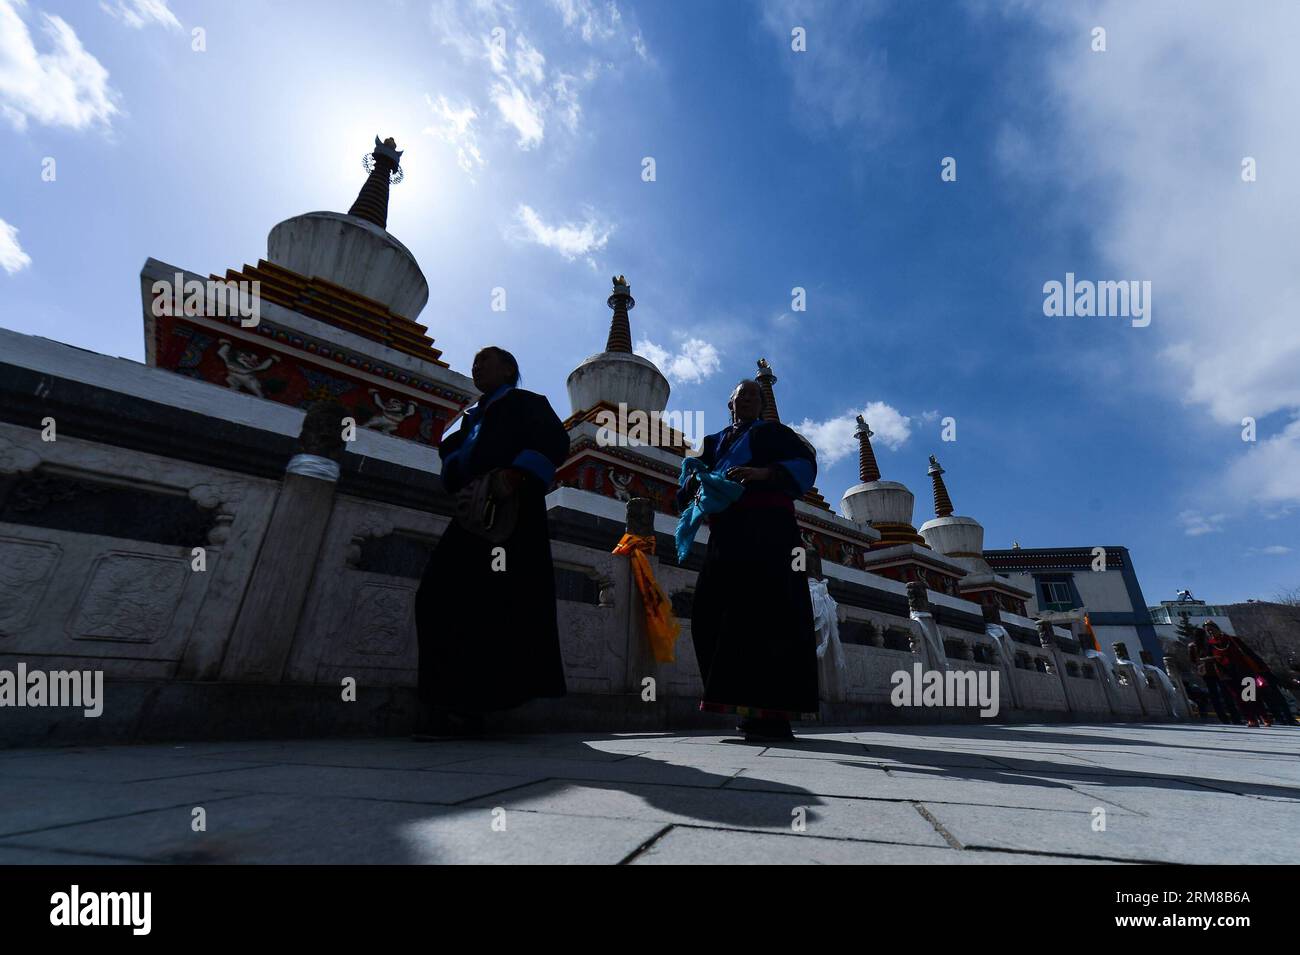 (140406) -- HUANGZHONG COUNTY, April 6, 2014 (Xinhua) -- Two Tibetan Buddhists worship in the Kumbum Monastery in Huangzhong County of Xining, capital of northwest China s Qinghai Province, April 6, 2014. The Kumbum Monastery is a main destination for Tibetan Buddhist pilgrims. It is also a major tourist attraction in Qinghai, which features splendid religious murals, Thangka appliques and butter sculptures. (Xinhua/Wu Gang) (lmm) CHINA-QINGHAI-KUMBUM MONASTERY-TOURISM (CN) PUBLICATIONxNOTxINxCHN   Huang Zhong County April 6 2014 XINHUA Two Tibetan Buddhists Worship in The Kumbum monastery in Stock Photo